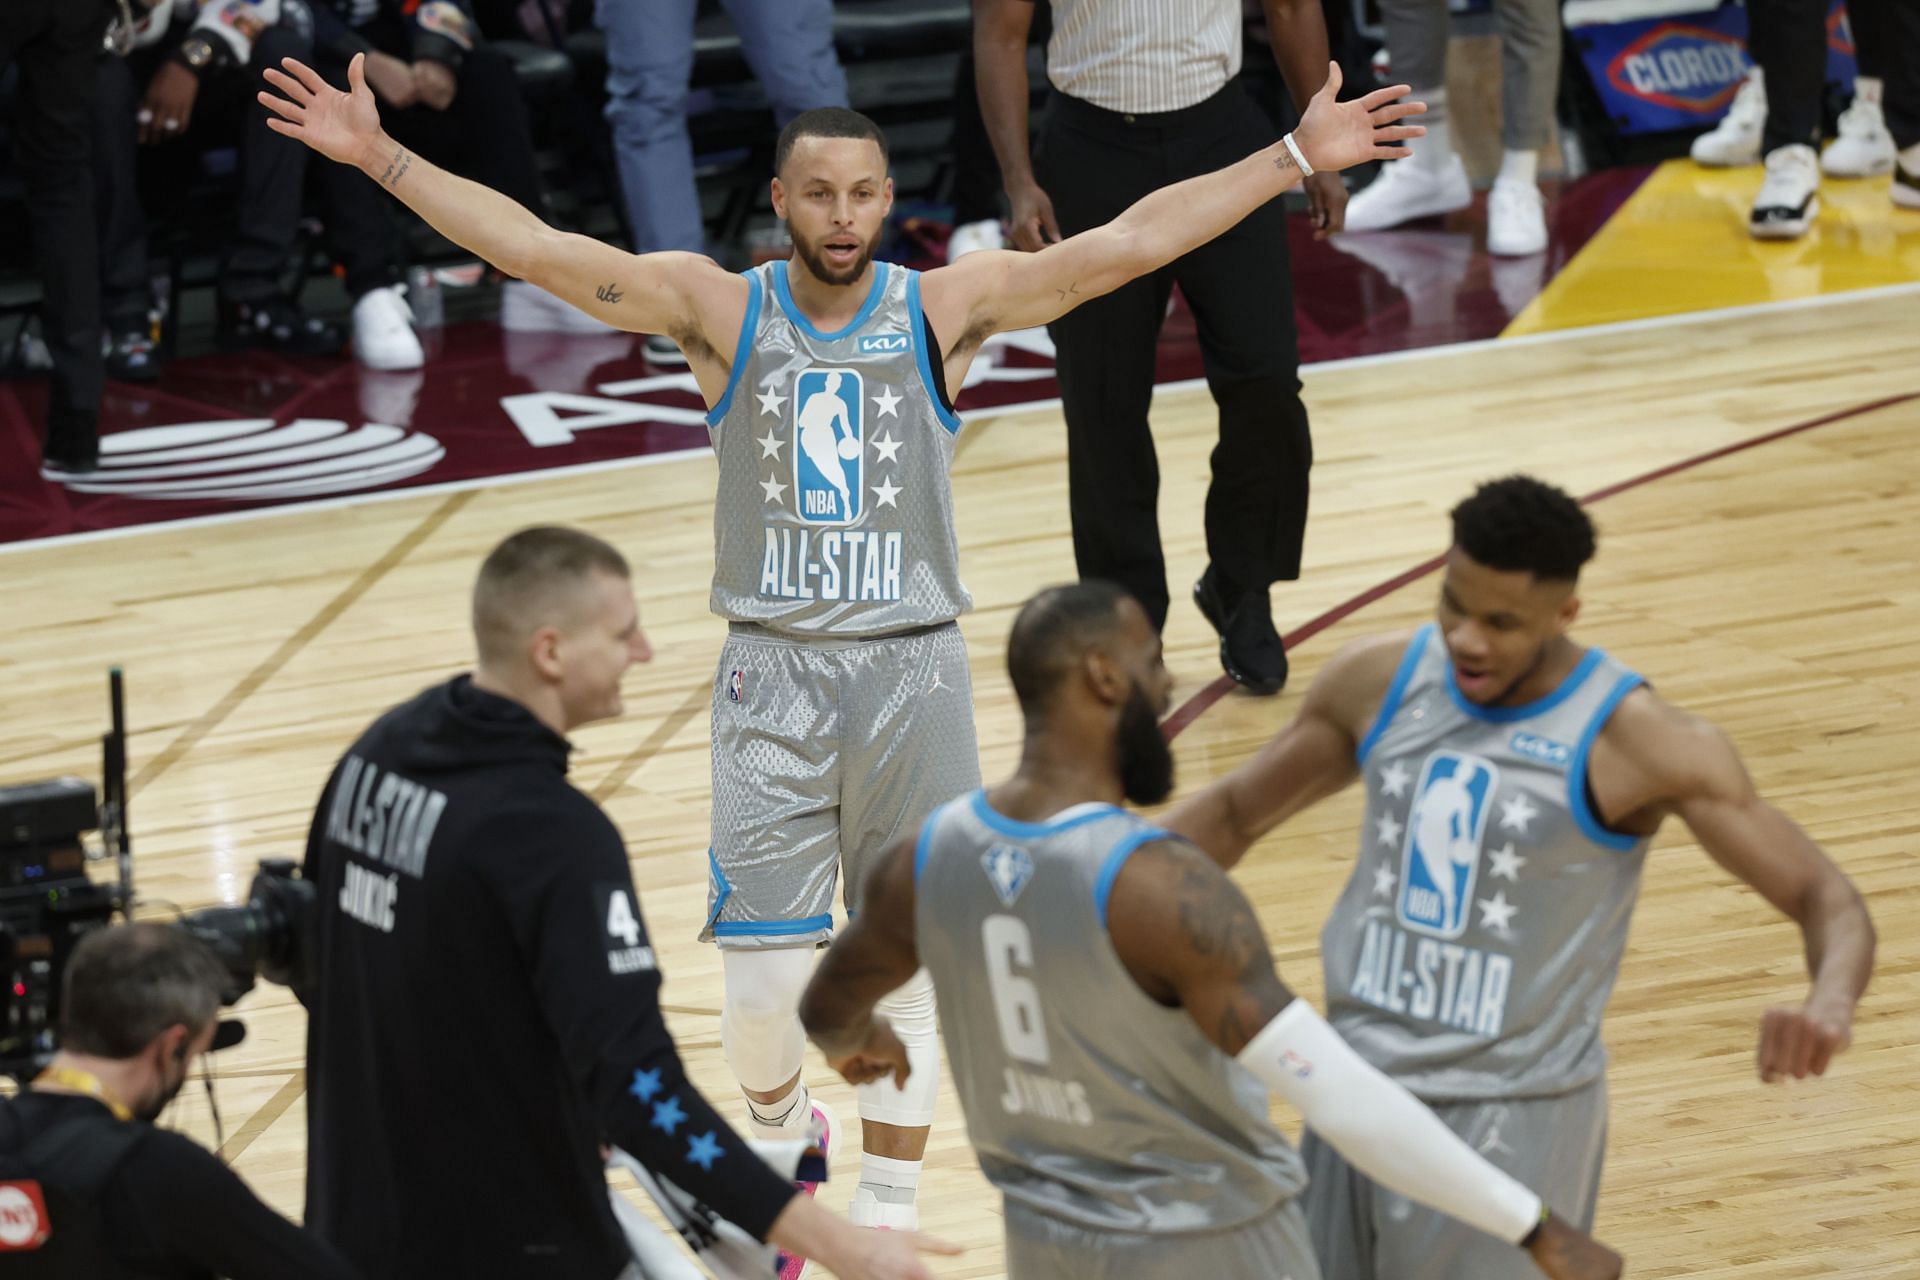 Steph Curry, LeBron James, Nikola Jokic and Giannis Antetokounmpo combined to make the All-Star Game a spectacle to see. [Photo: The Sun]